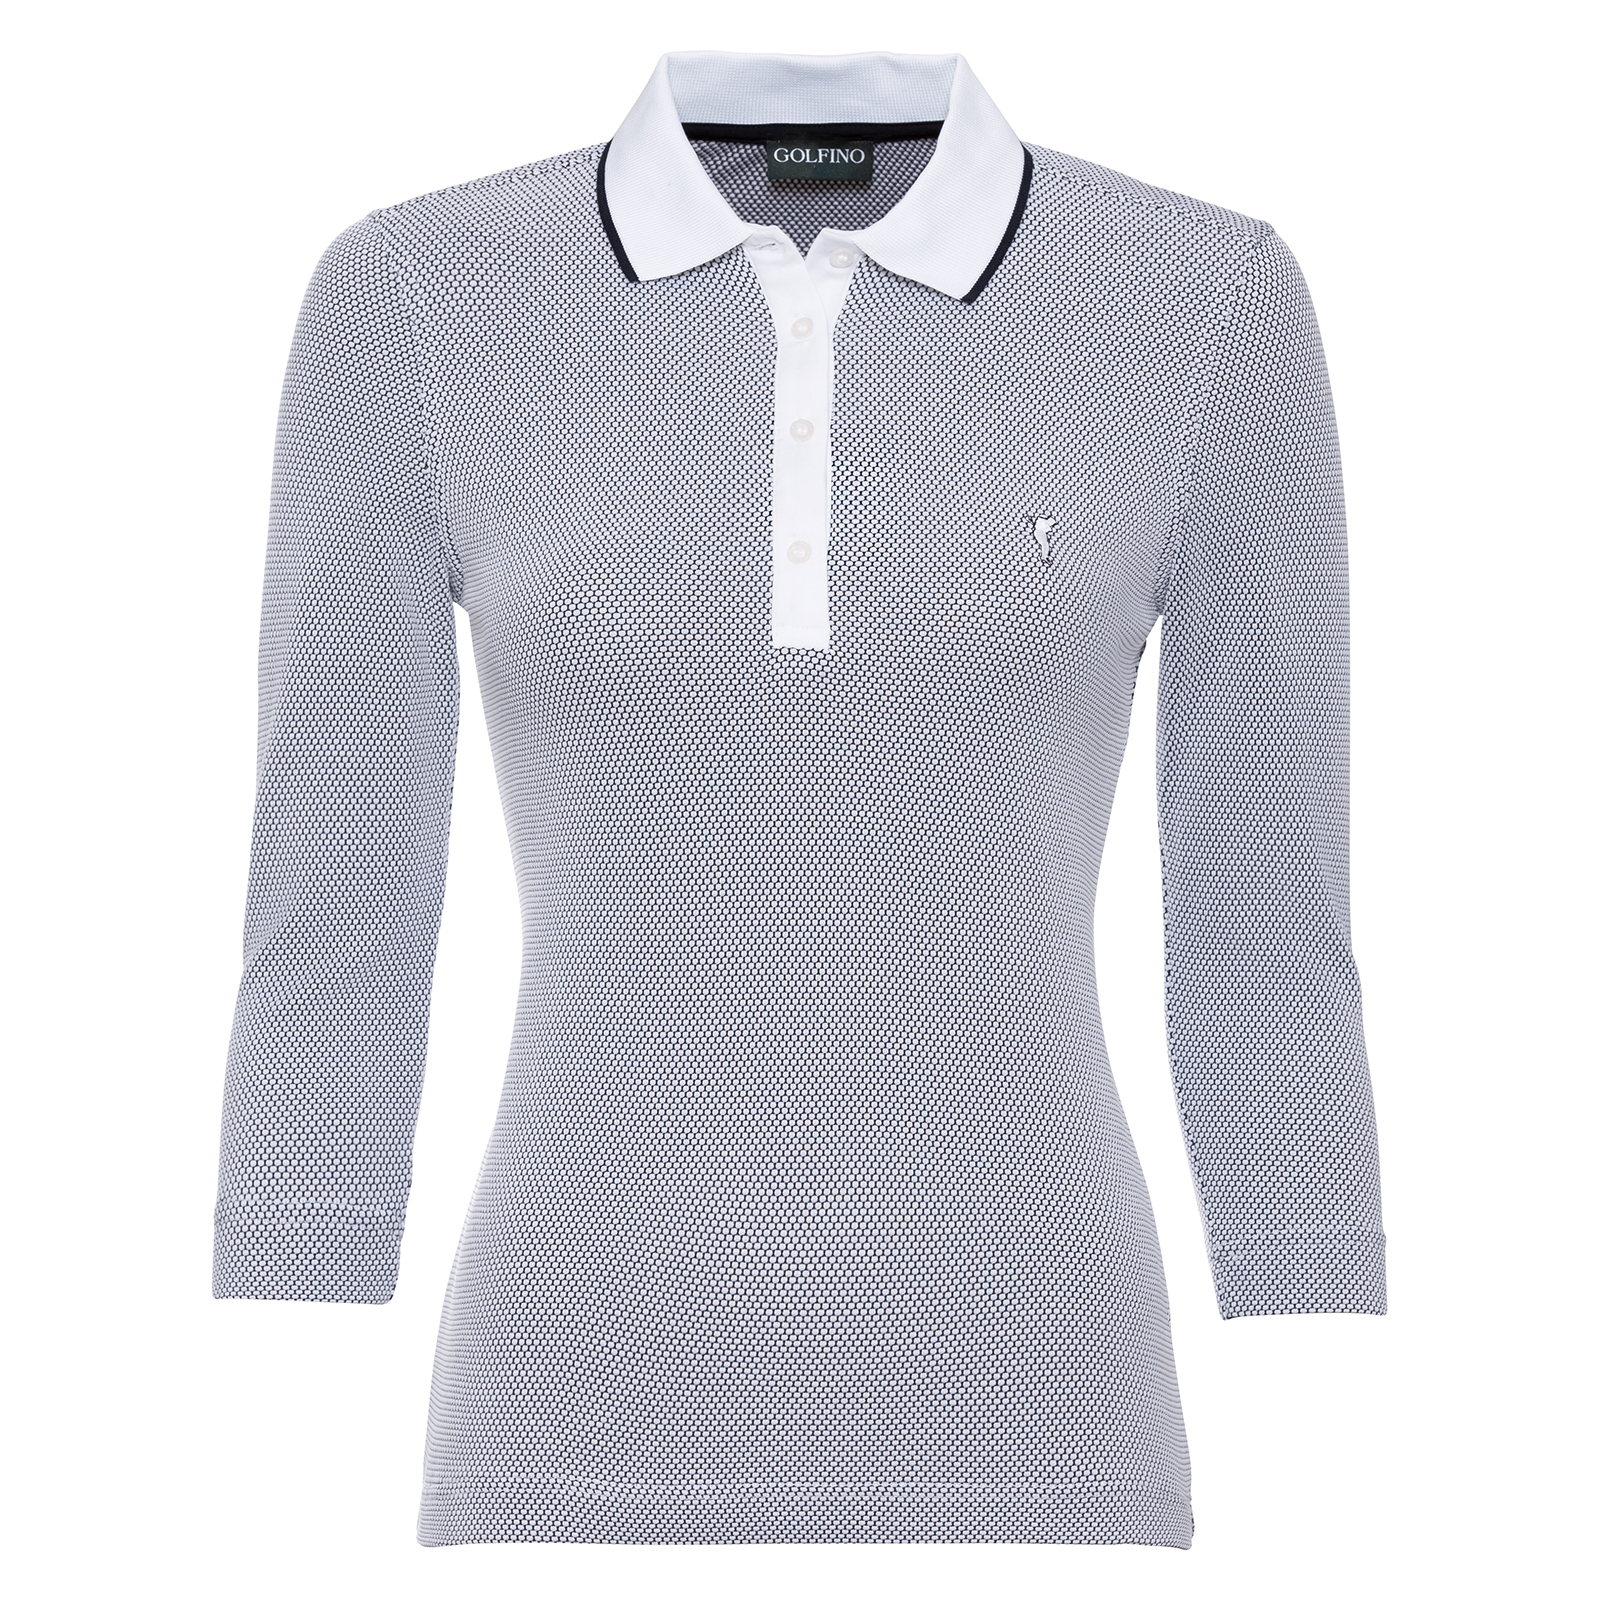 Ladies' golf polo shirt with 3/4-sleeves made from moisture-regulating bubble Jacquard fabric